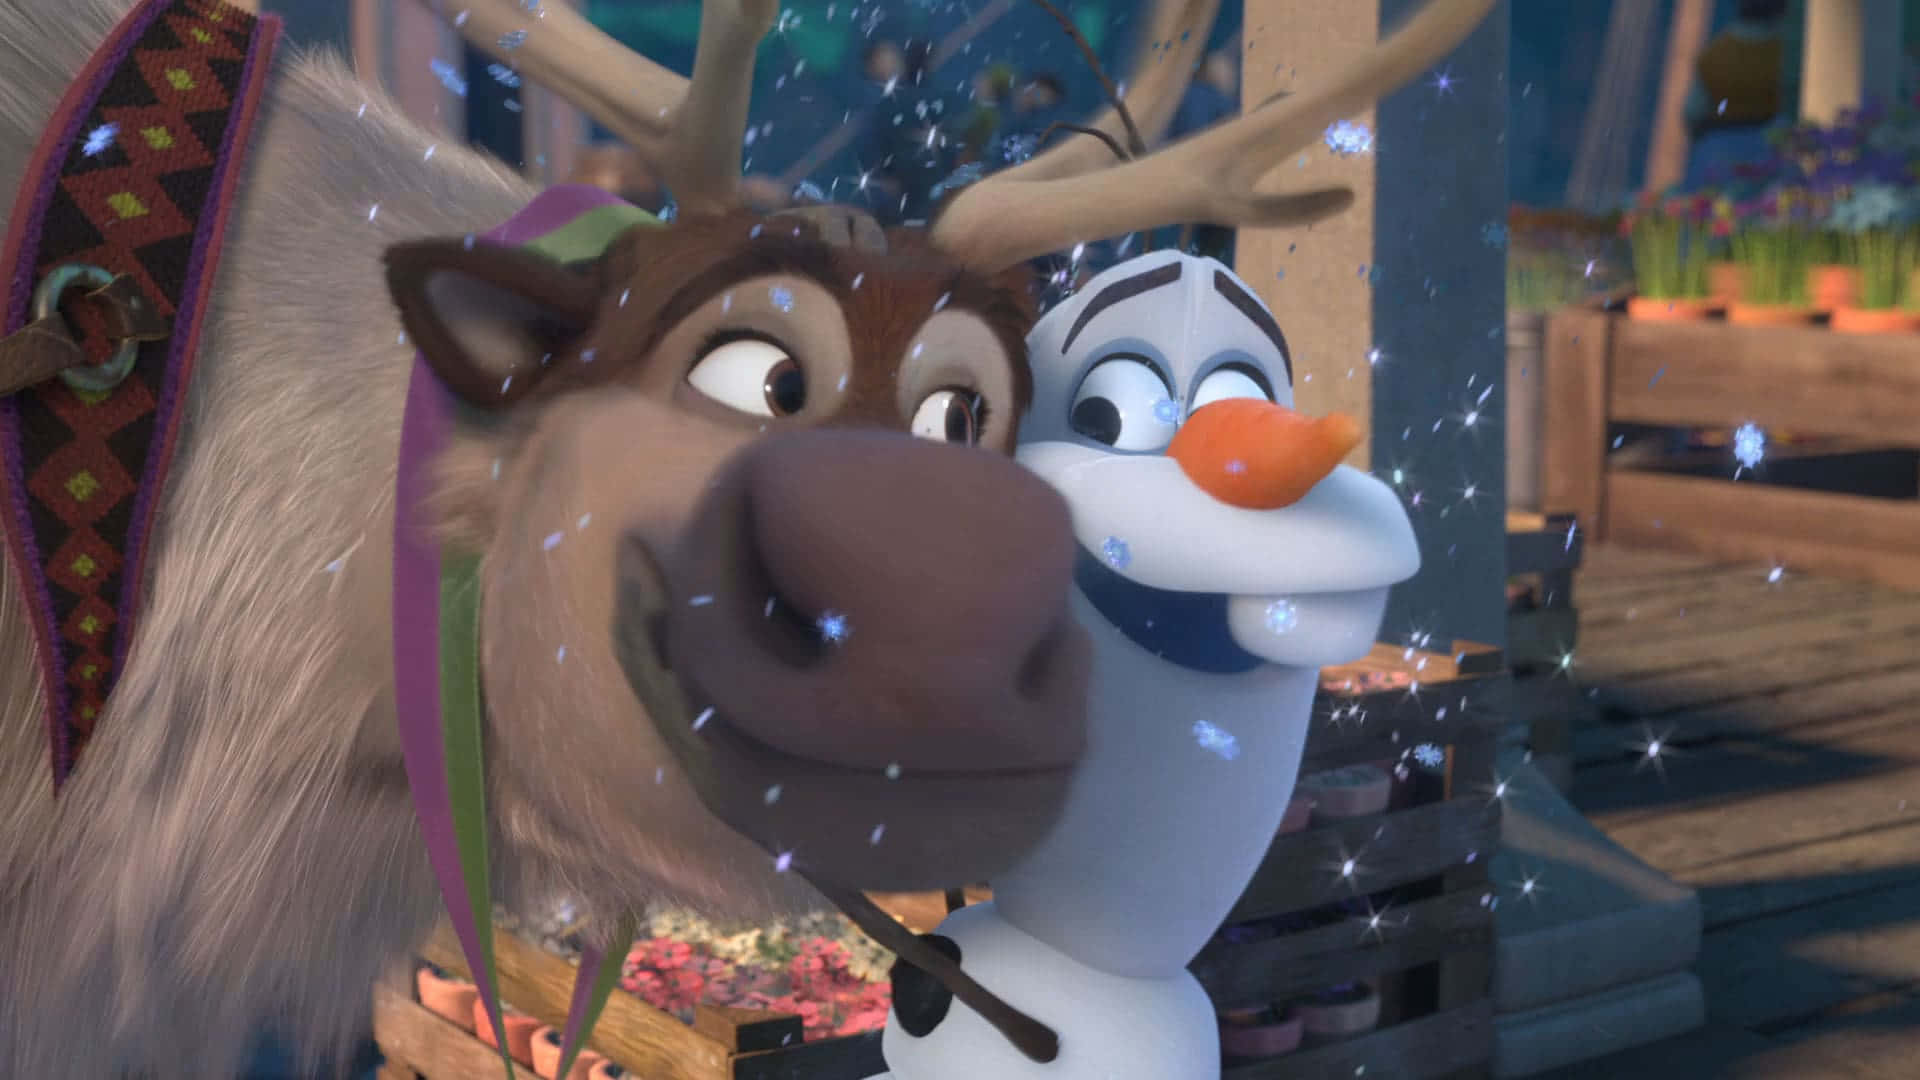 "Smiling with delight, Cute Olaf is here to brighten your day!" Wallpaper